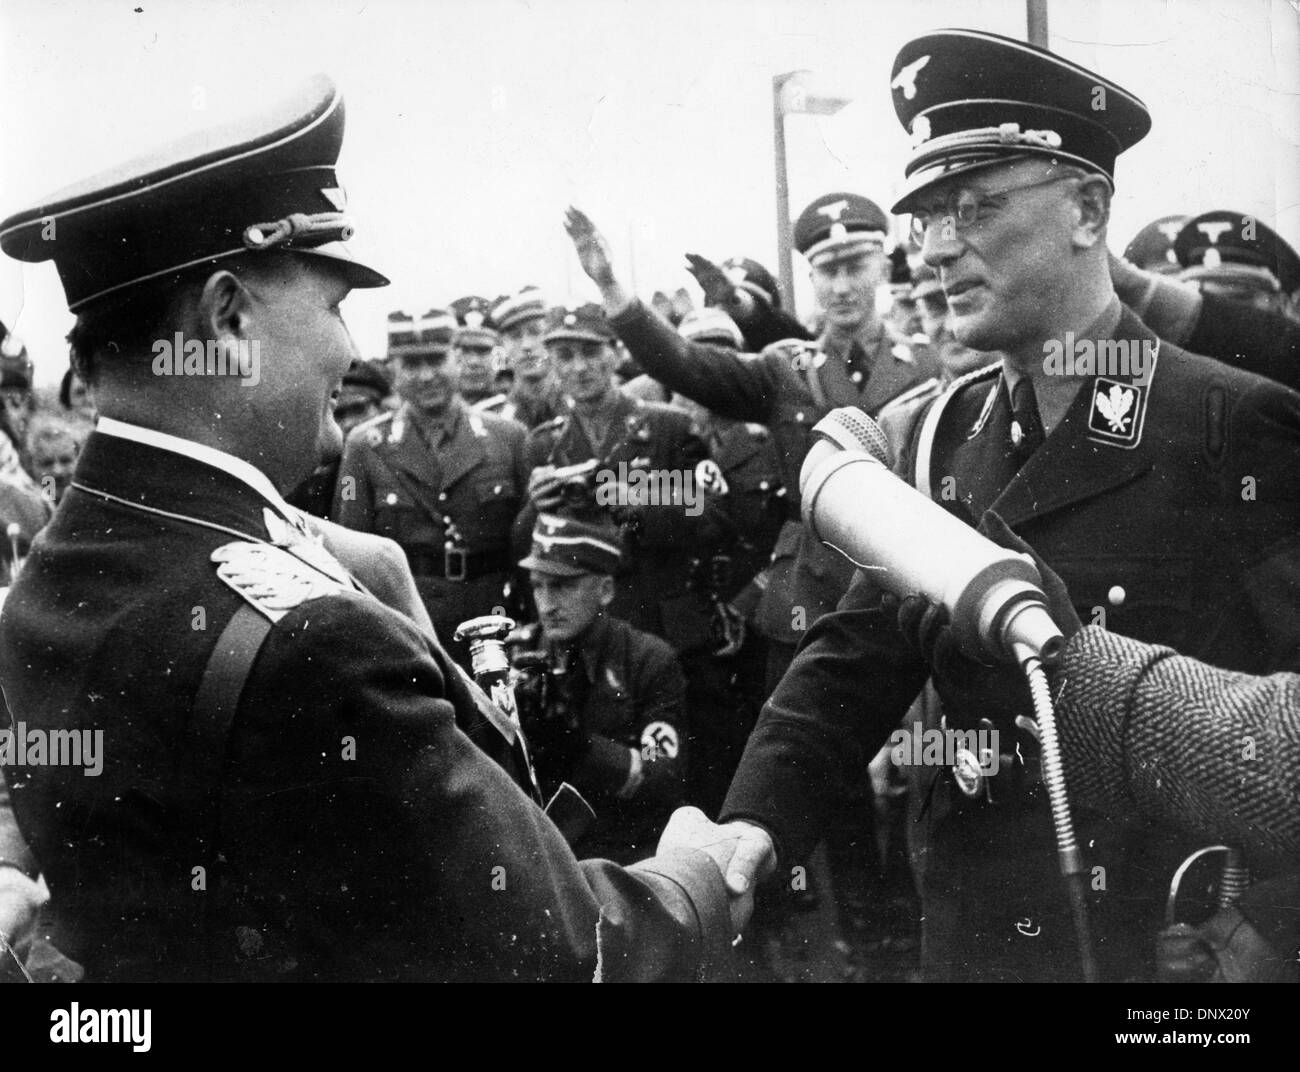 March 28, 1938 - Vienna, Austria - Nazi leader and President of the Reichstage, HERMANN GOERING greeted by Dr. ARTHUR SEYSS-INQUART of Austria, on his arrival at the Reich's Bridge, Vienna, to take part in the Nazi plebiscite campaign in 1938. (Credit Image: © KEYSTONE Pictures/ZUMAPRESS.com) Stock Photo